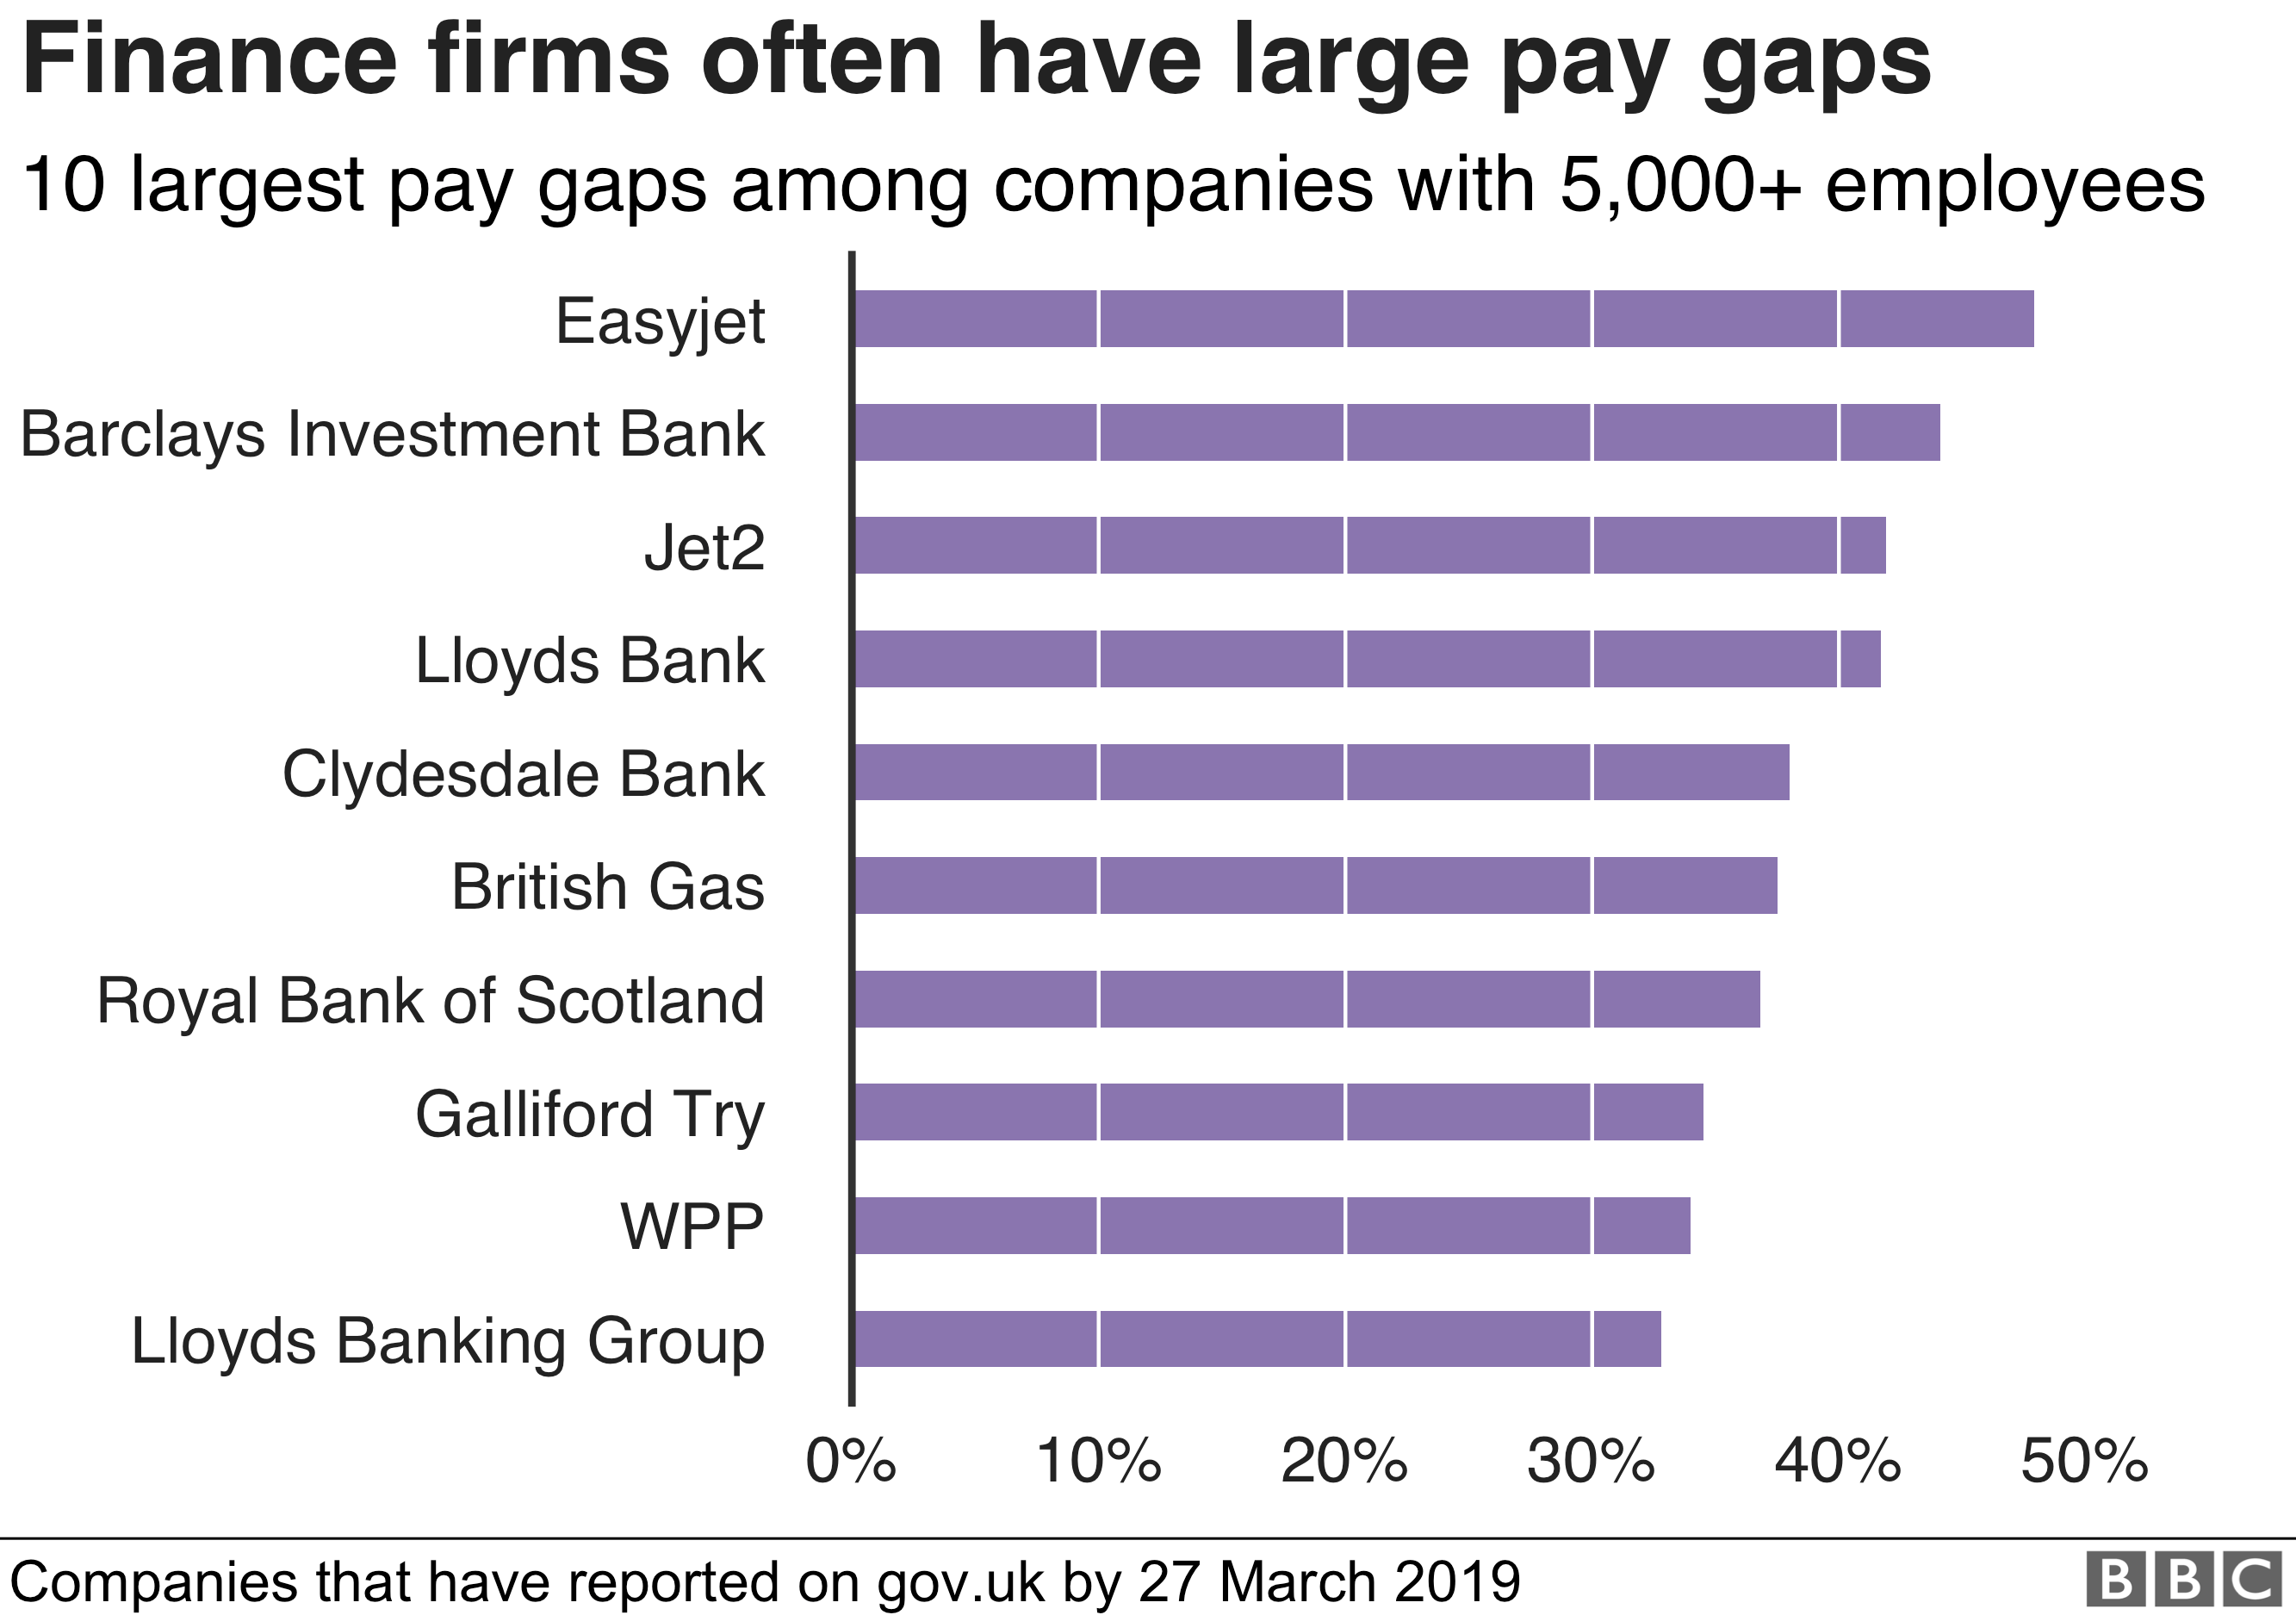 Chart showing that 5 out of the 10 big firms with widest pay gaps are banks.